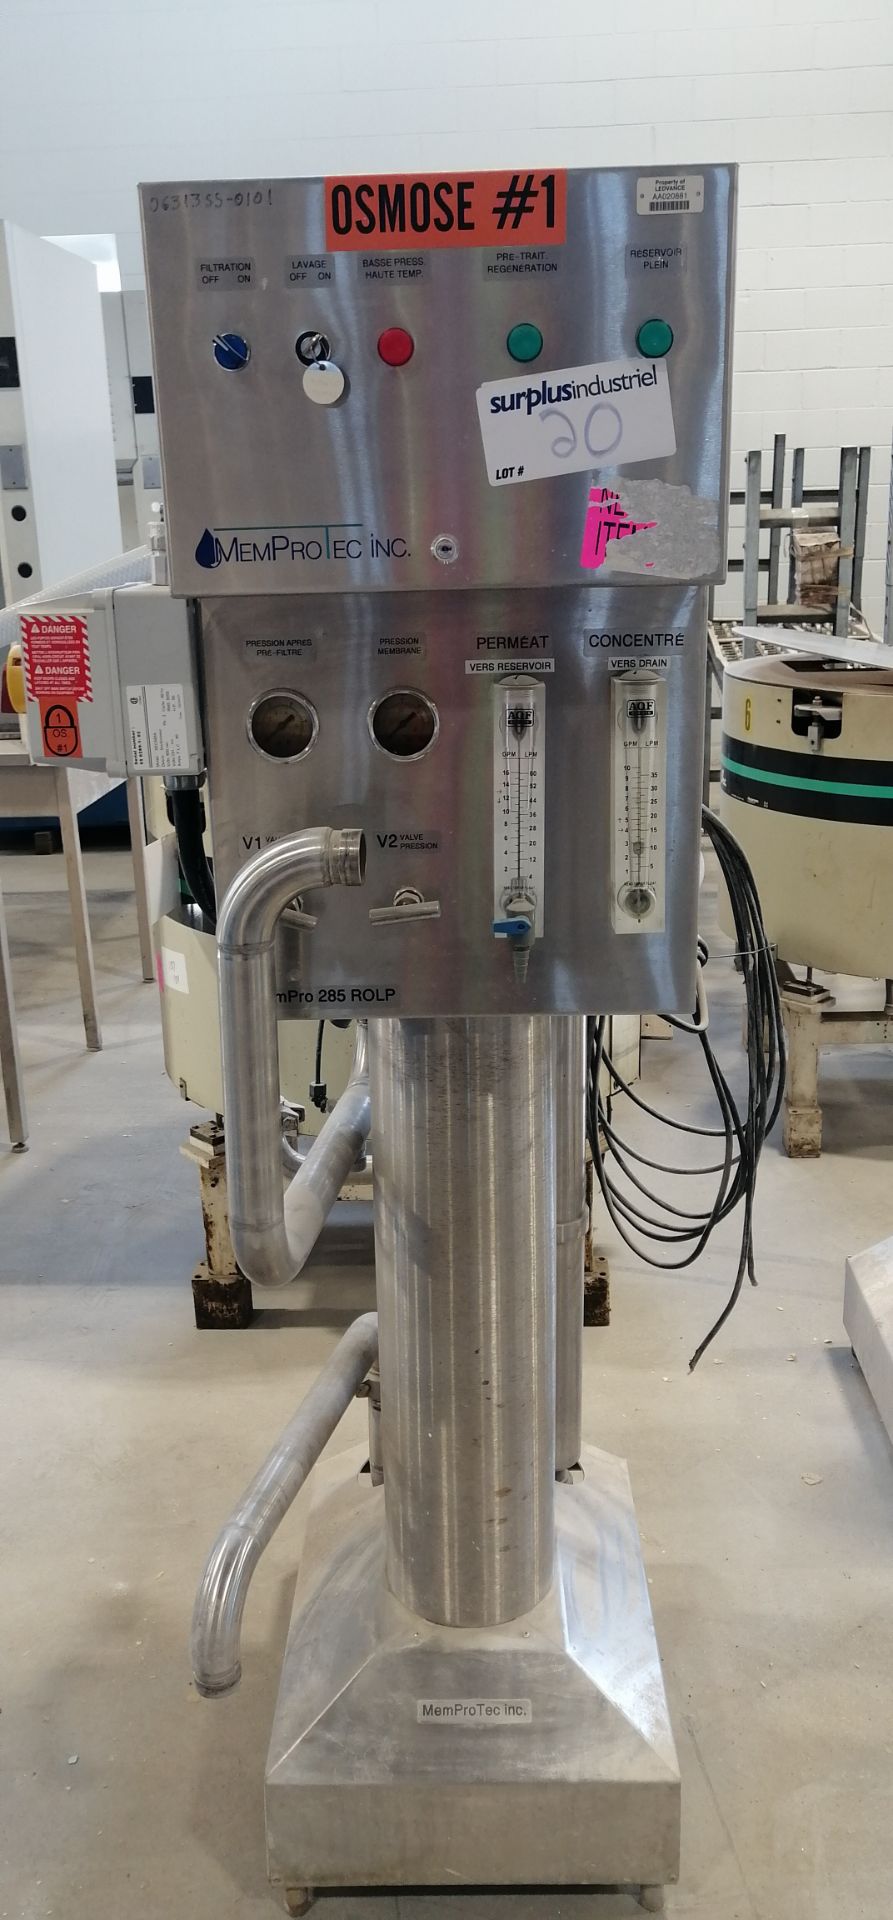 MemPro Series Stainless Steel Reverse osmosis or nanofiltration system Model:285-ROLP